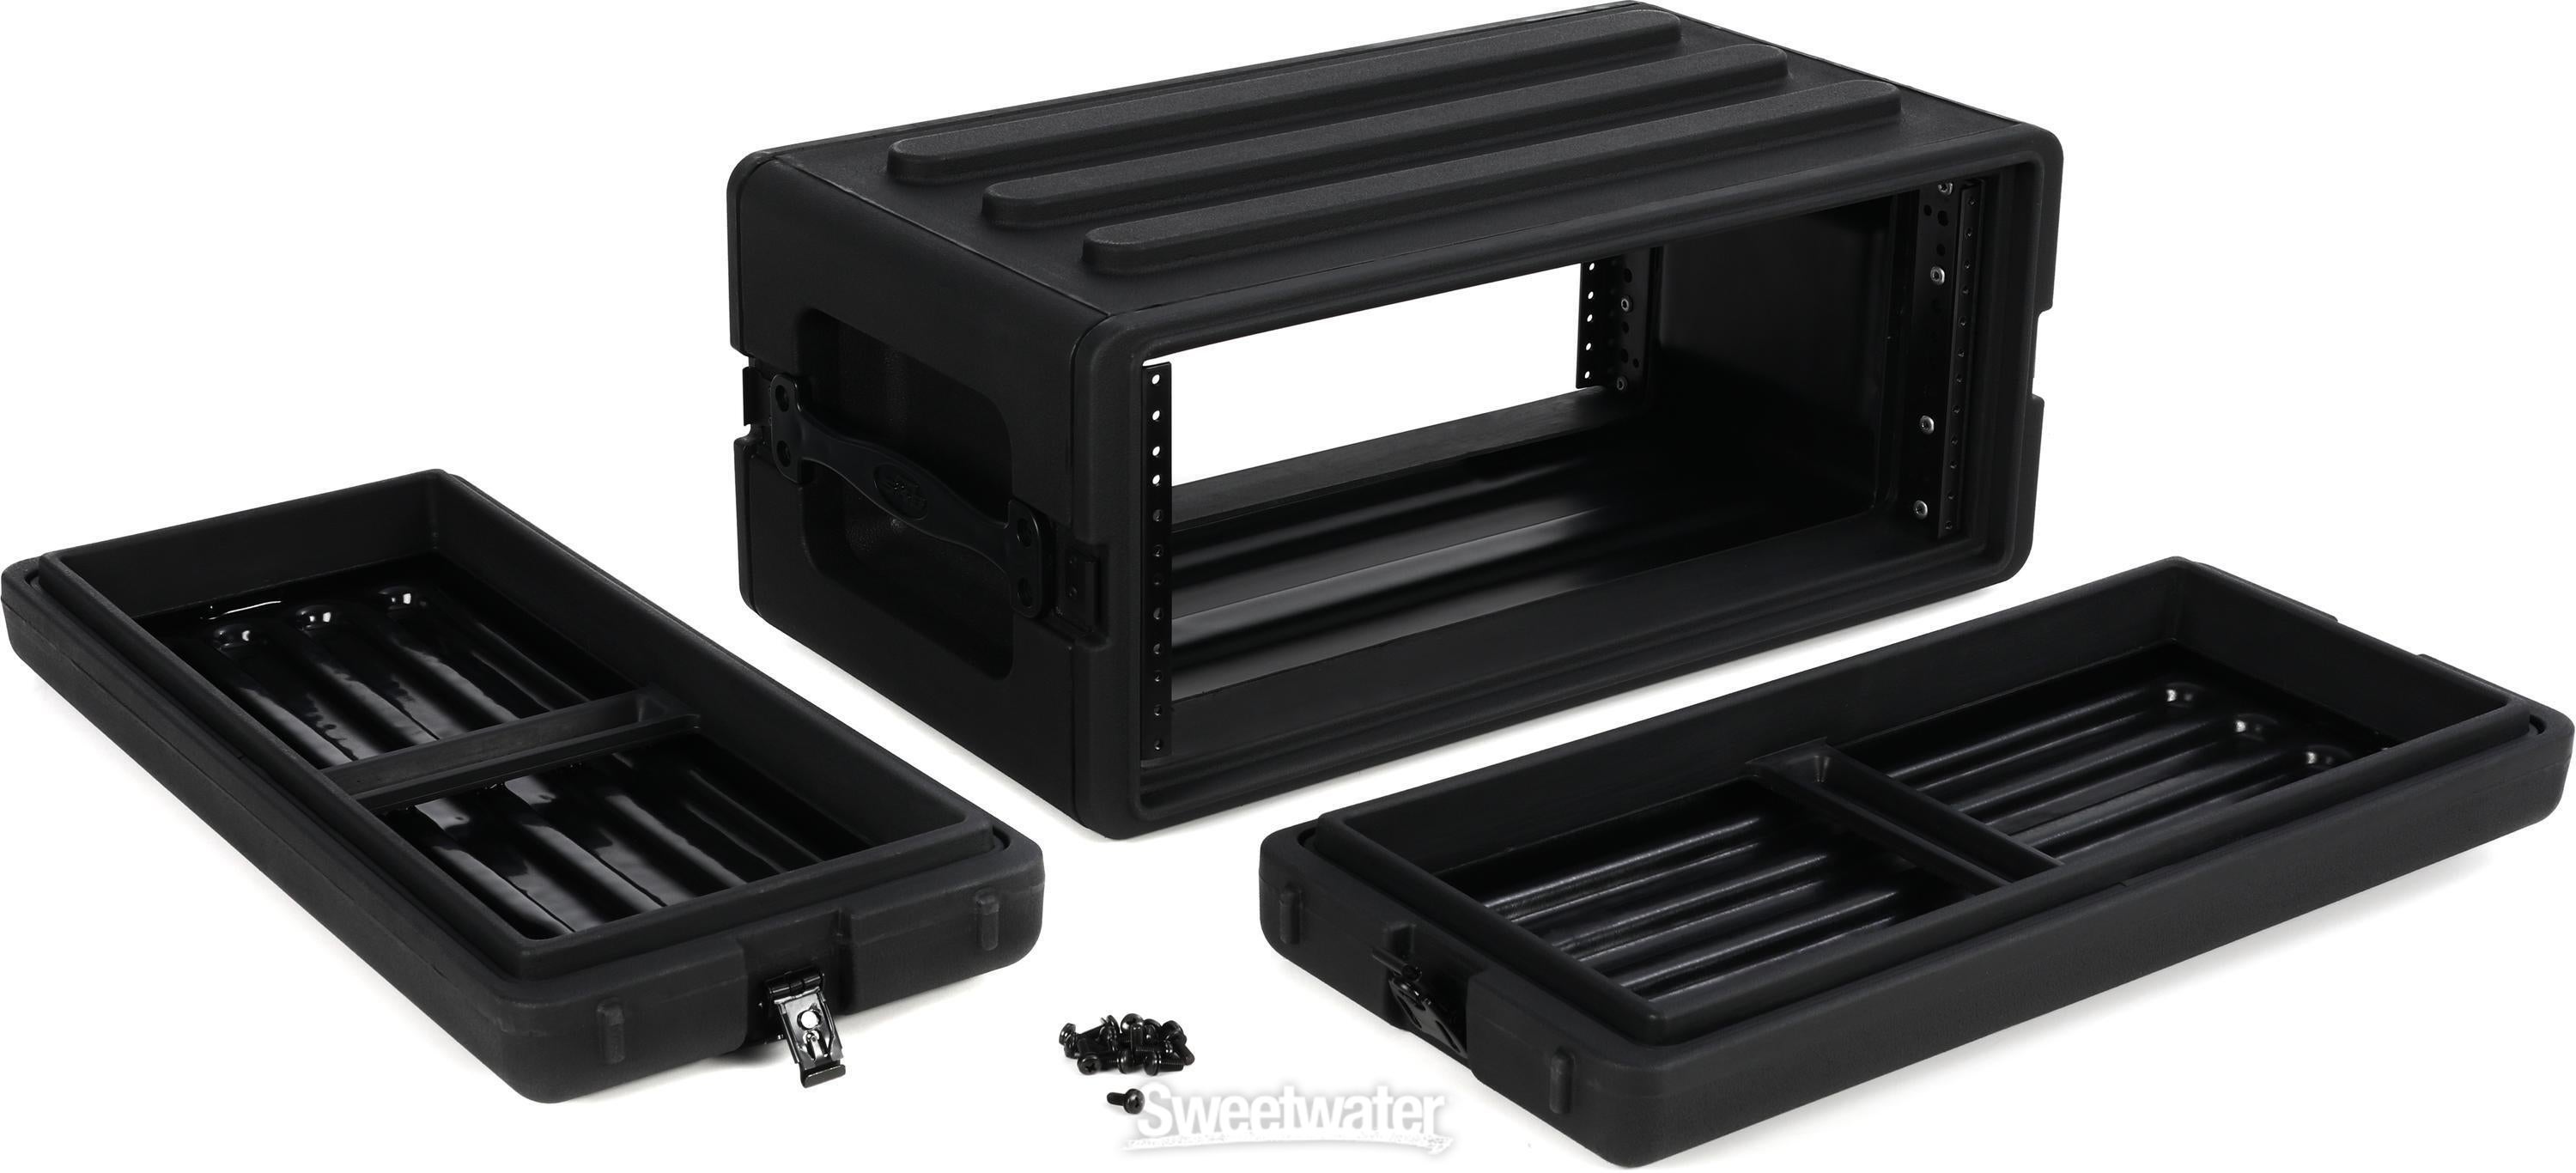 SKB 1SKB-R4S Roto-Molded Shallow 4U Rack Case | Sweetwater